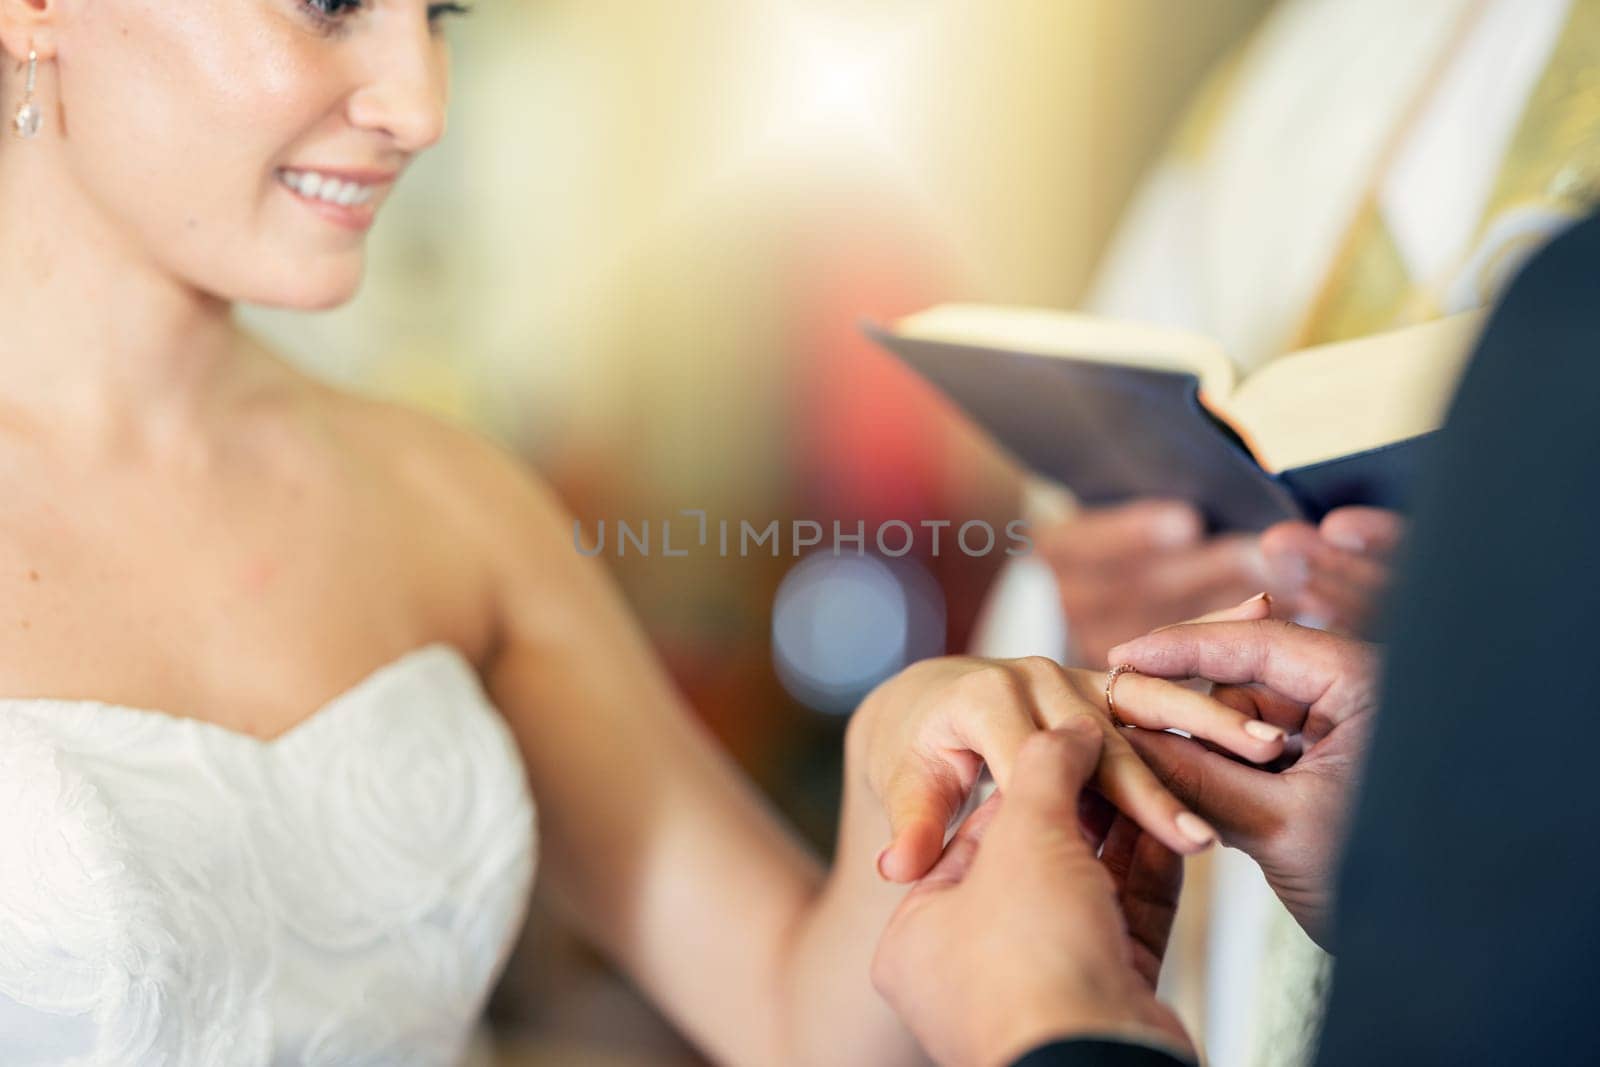 Wedding, marriage and putting ring on finger of bride in celebration of love, romance and commitment. Young couple getting married in church with groom giving jewellery to wife in wedding ceremony.